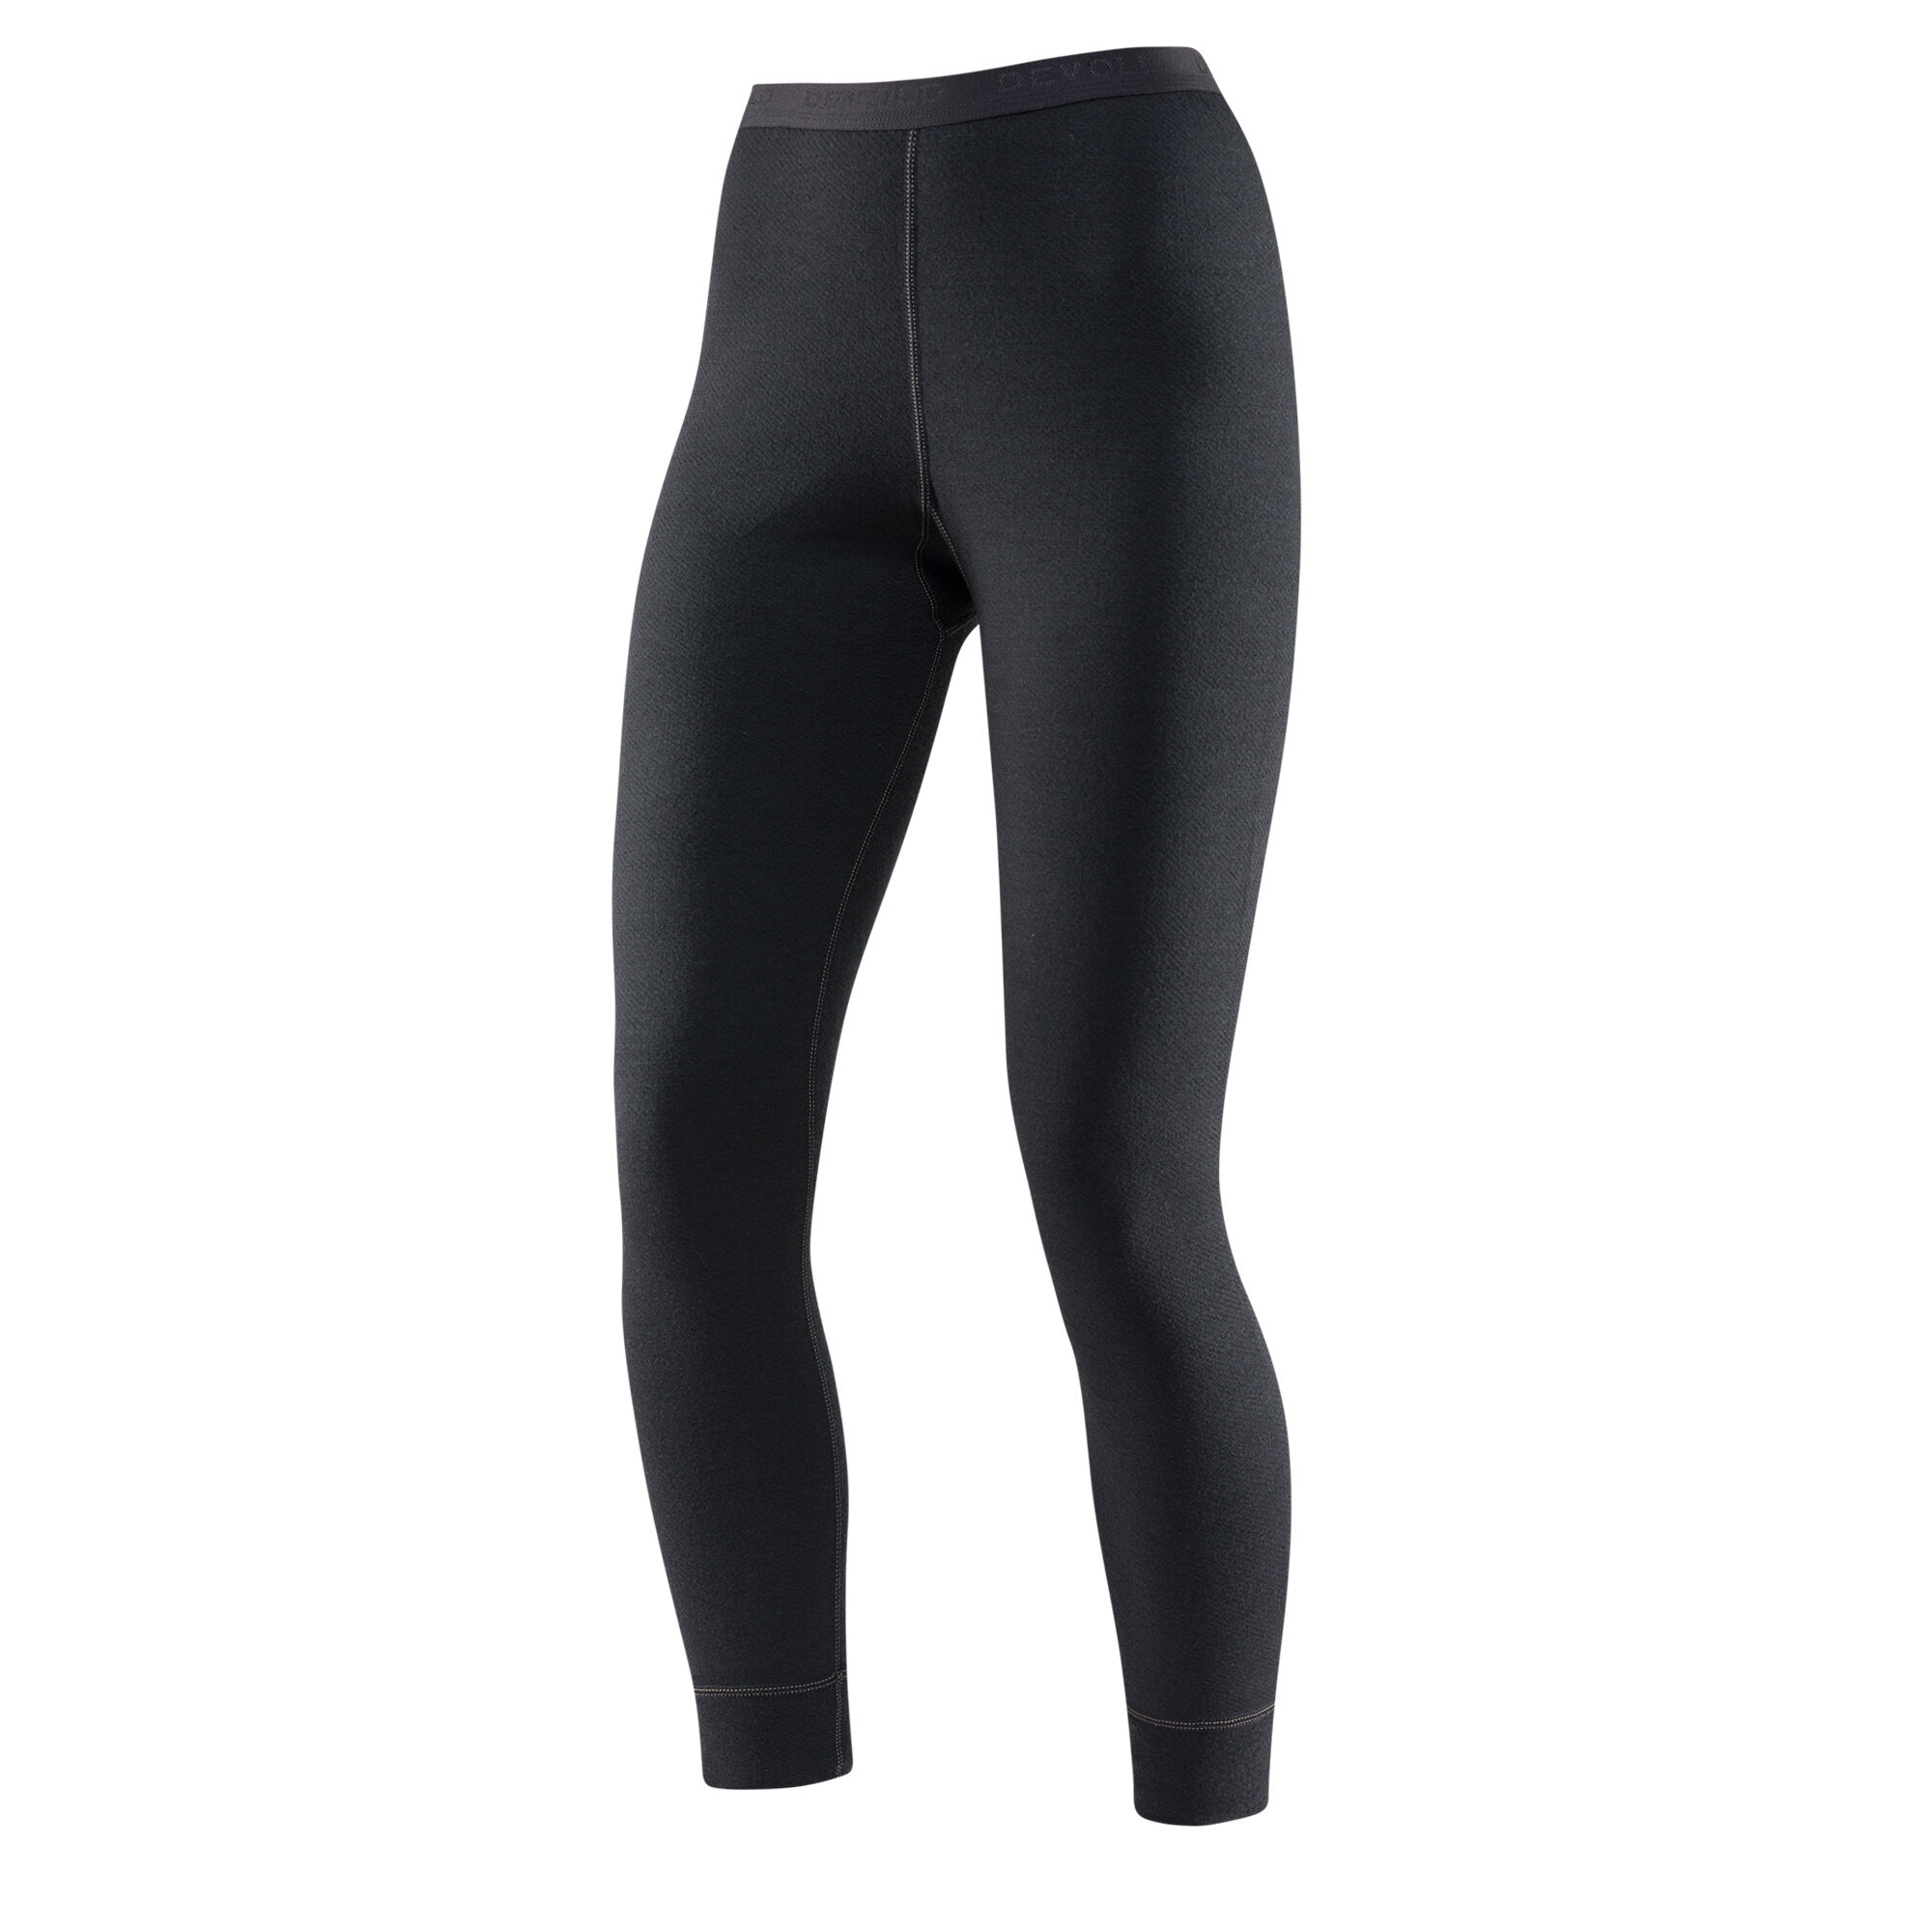 Devold Expedition Long Johns - Intimo - Donna